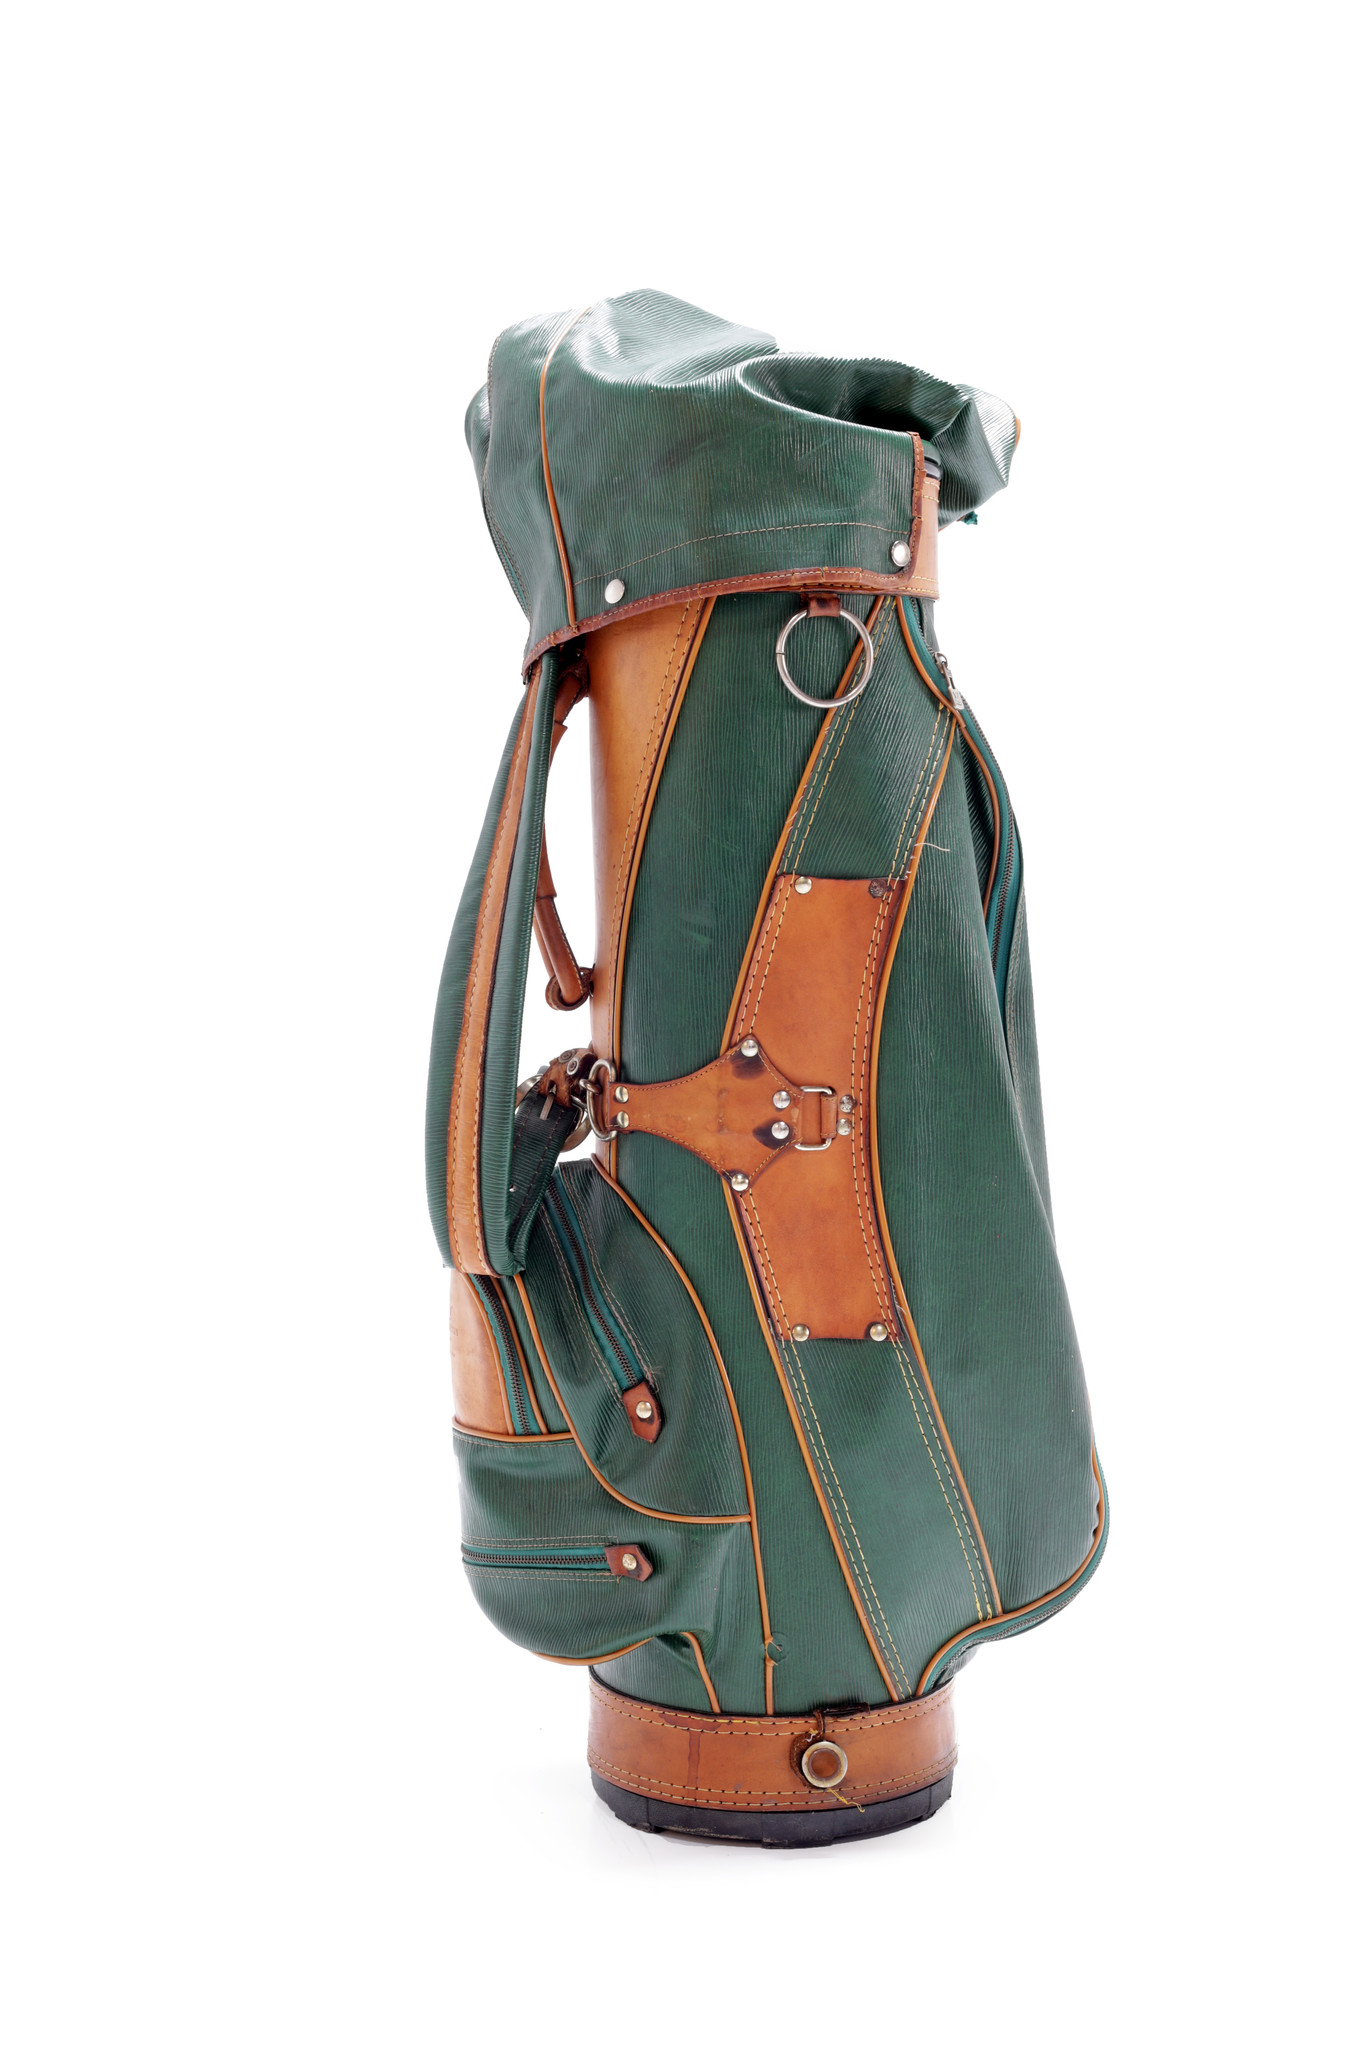 406 LOUIS VUITTON golf bag  Branded Luxury 7 December 2004  Auctions   Wright Auctions of Art and Design